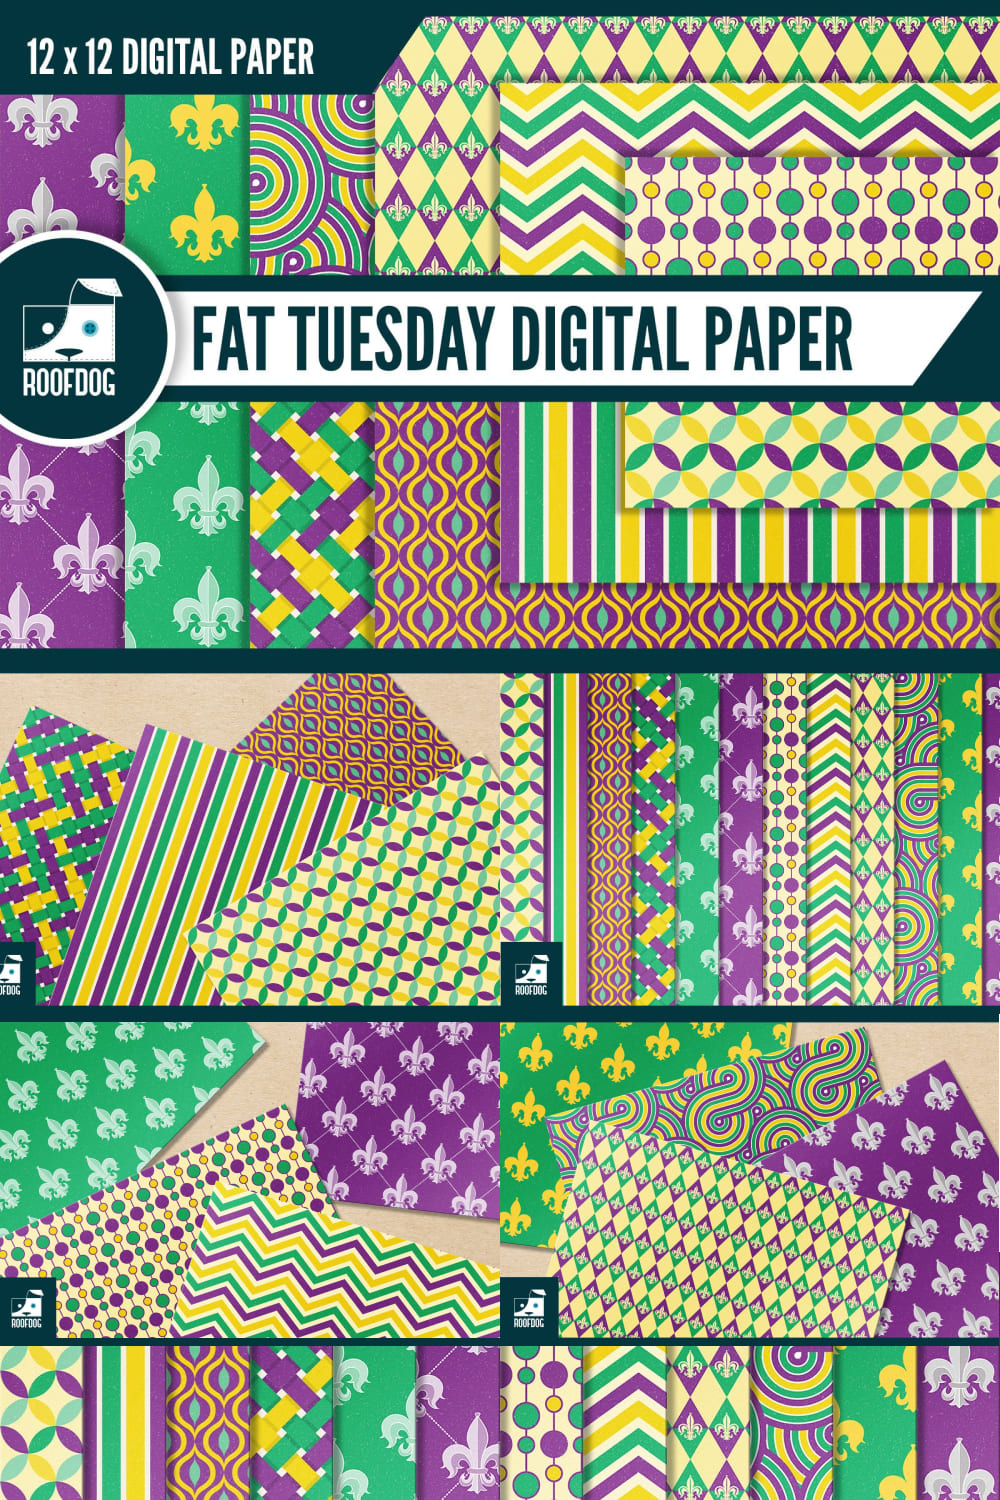 12*12 digital paper of fat tuesday.